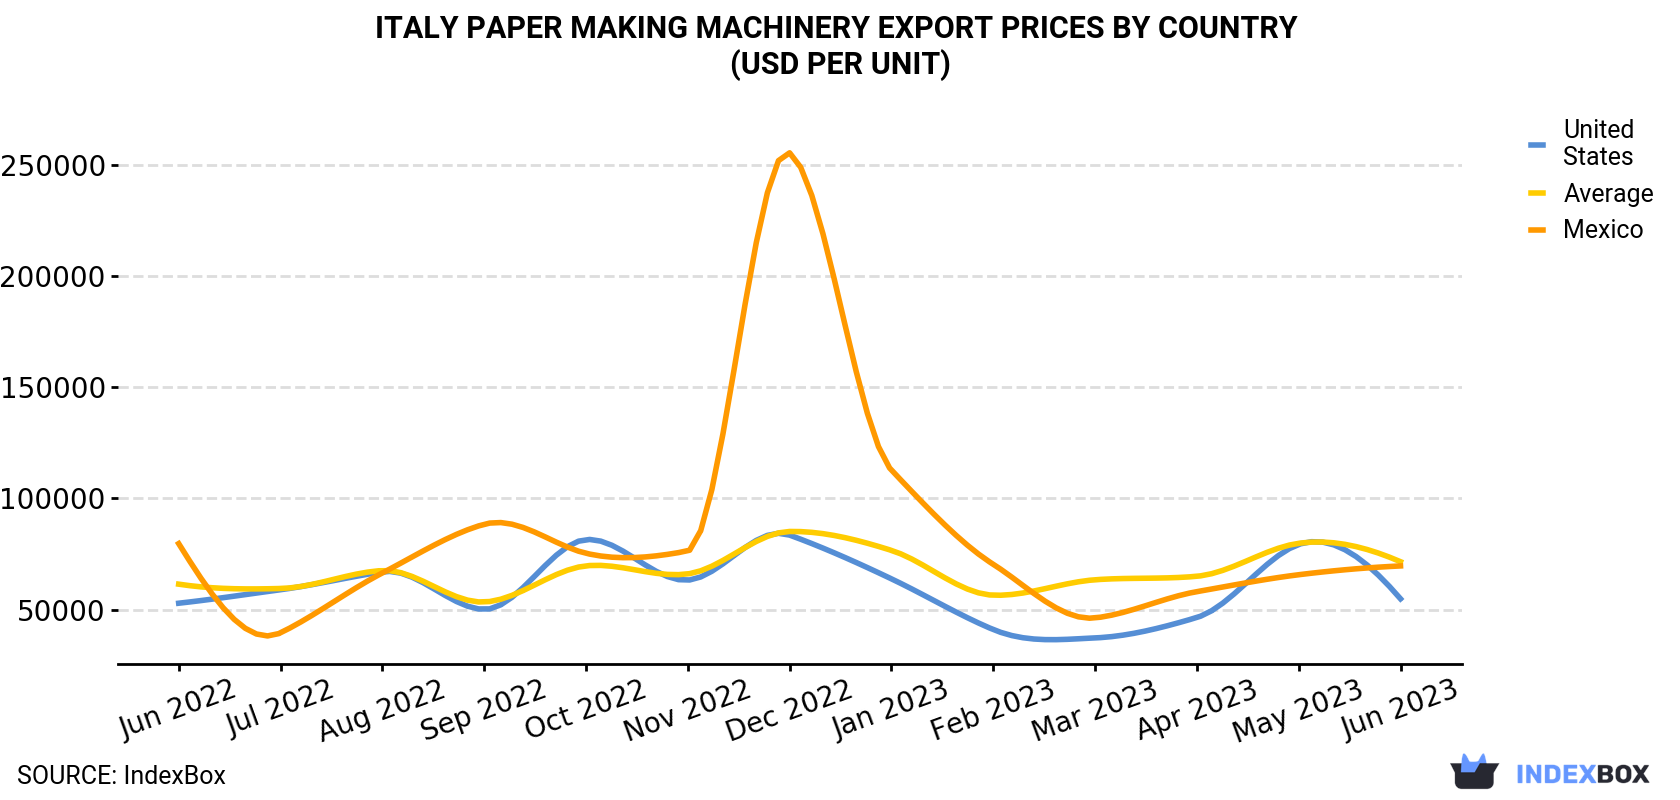 Italy Paper Making Machinery Export Prices By Country (USD Per Unit)